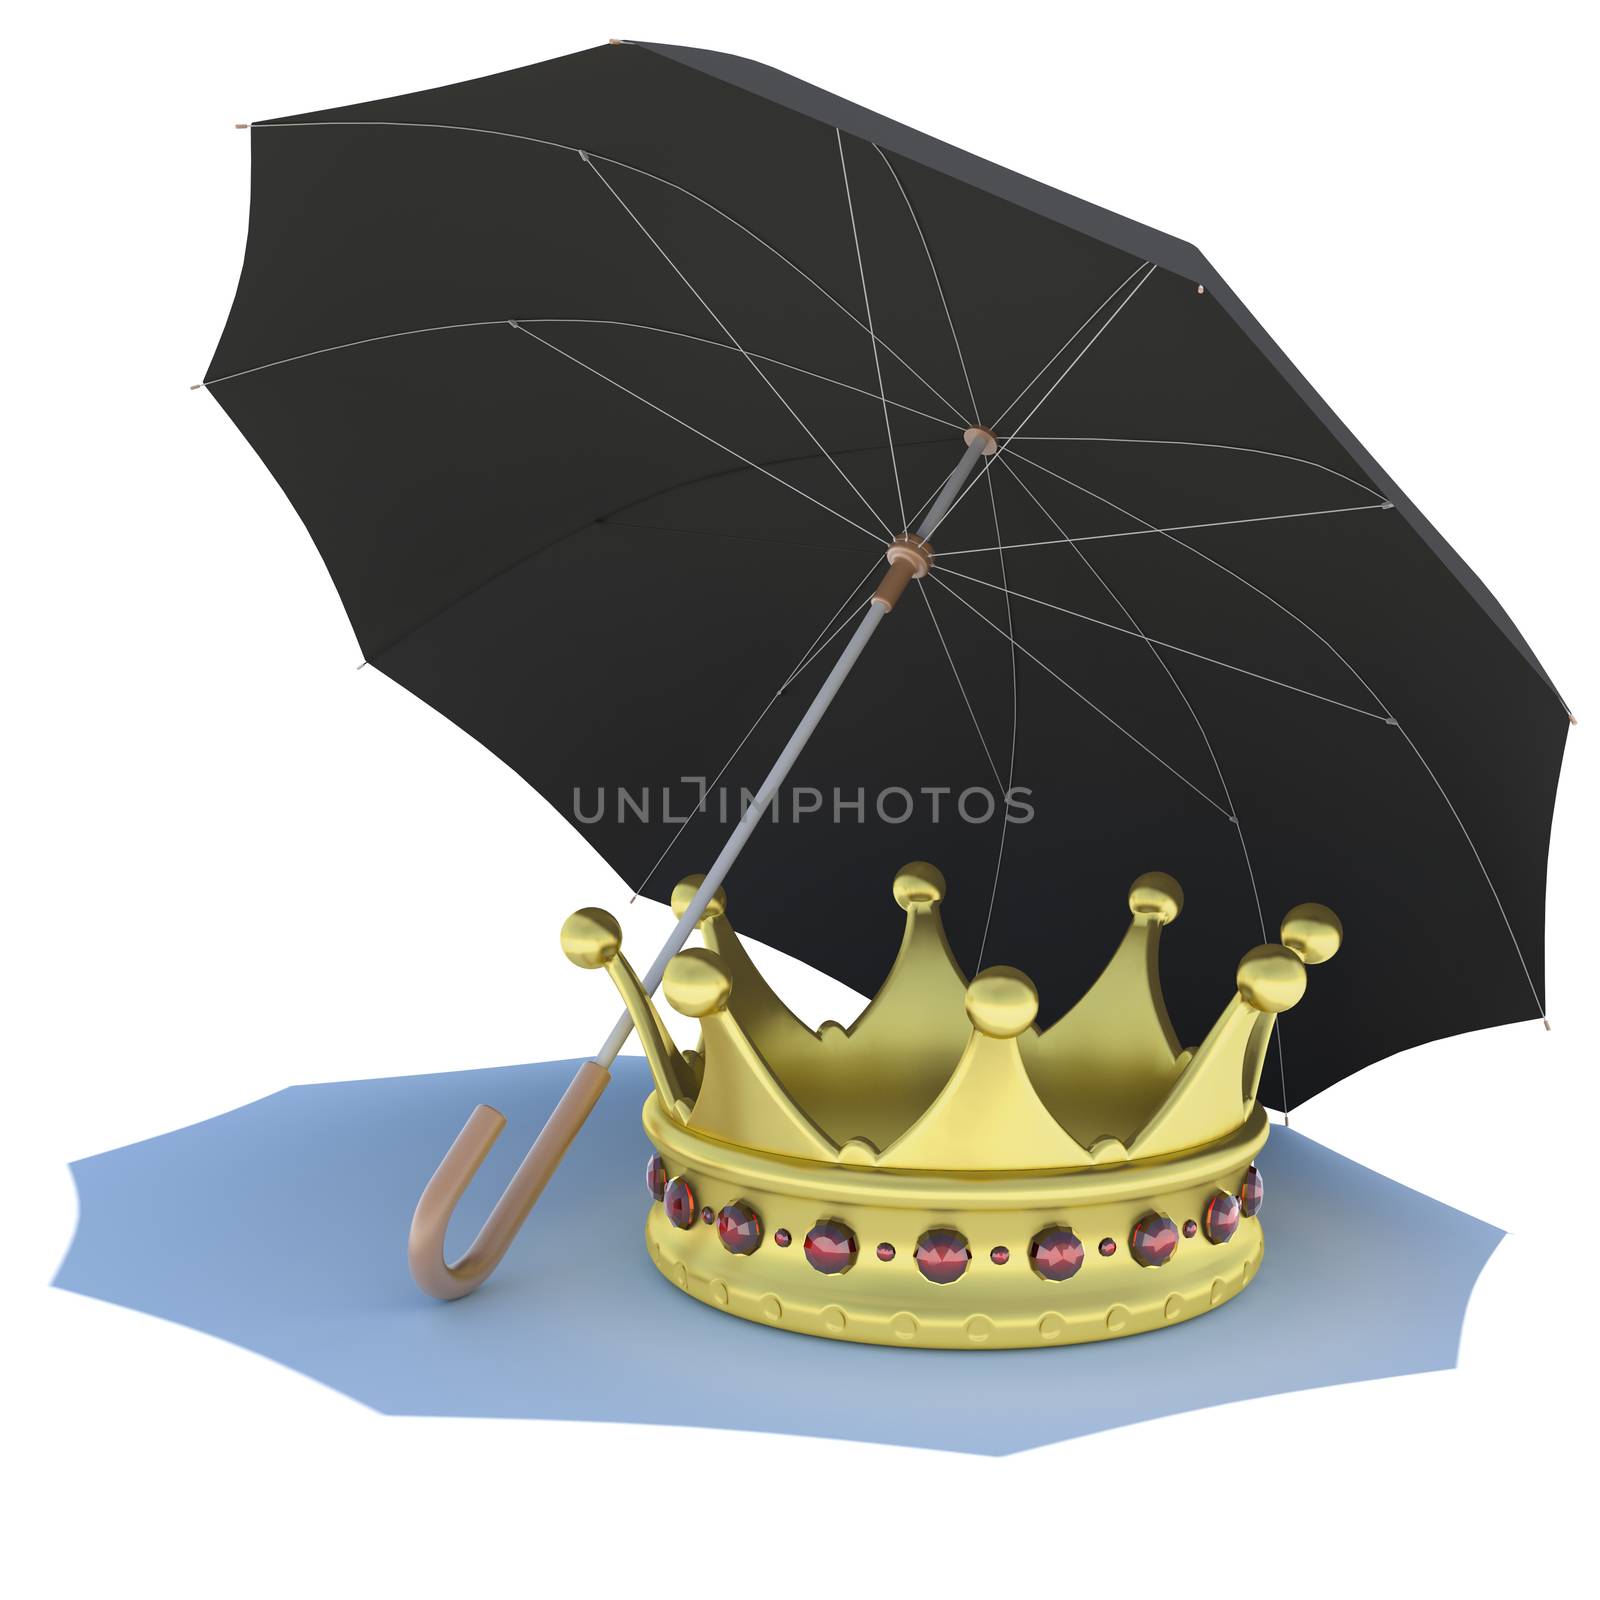 Umbrella covers the gold crown. Isolated render on a white background